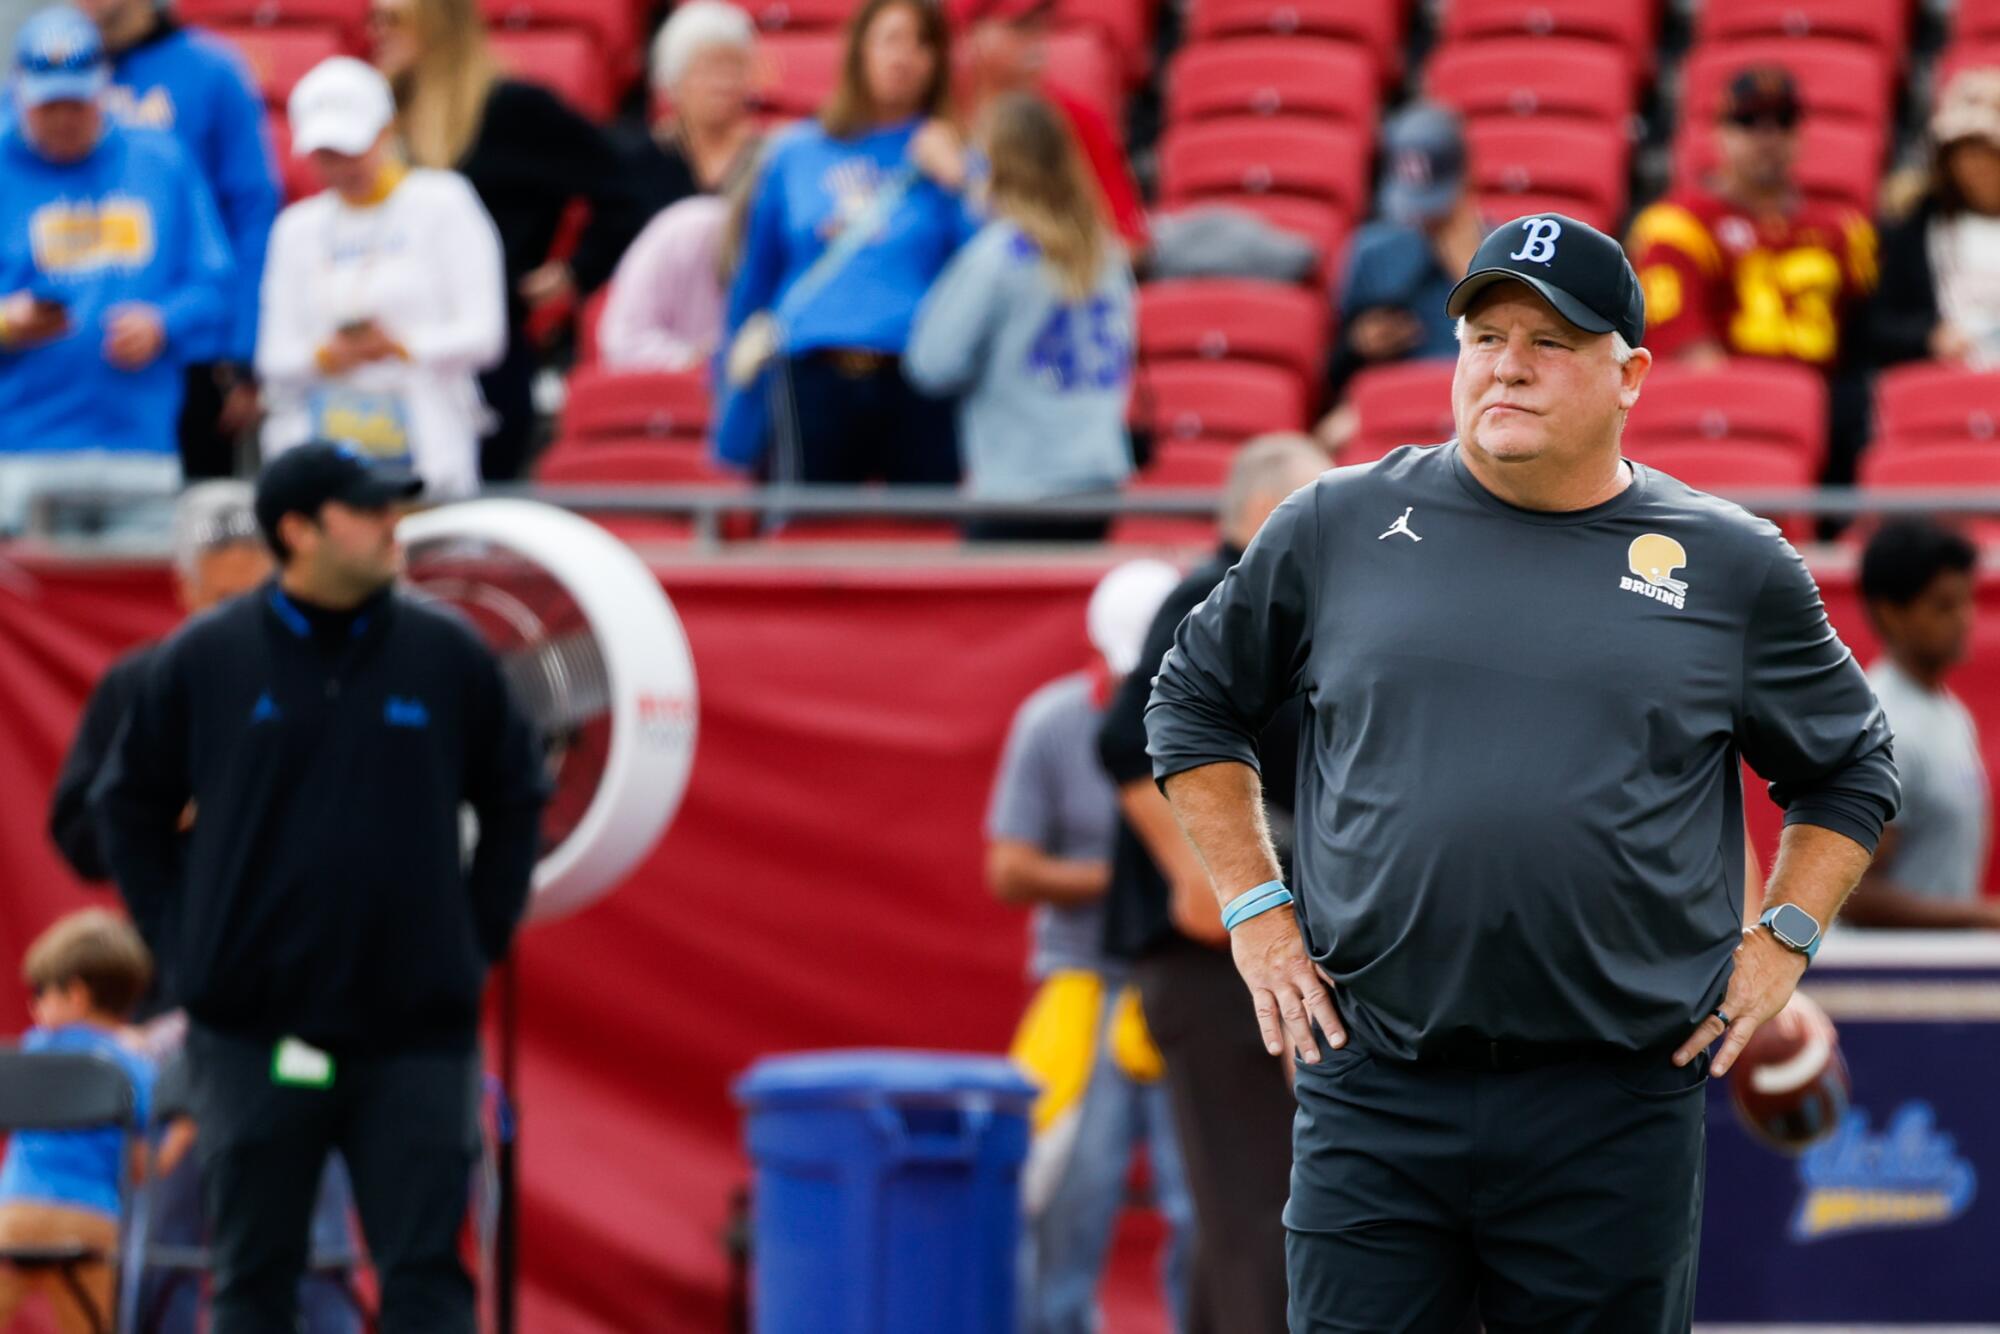 UCLA coach Chip Kelly watches warmups before Saturday's game against USC at the Coliseum.